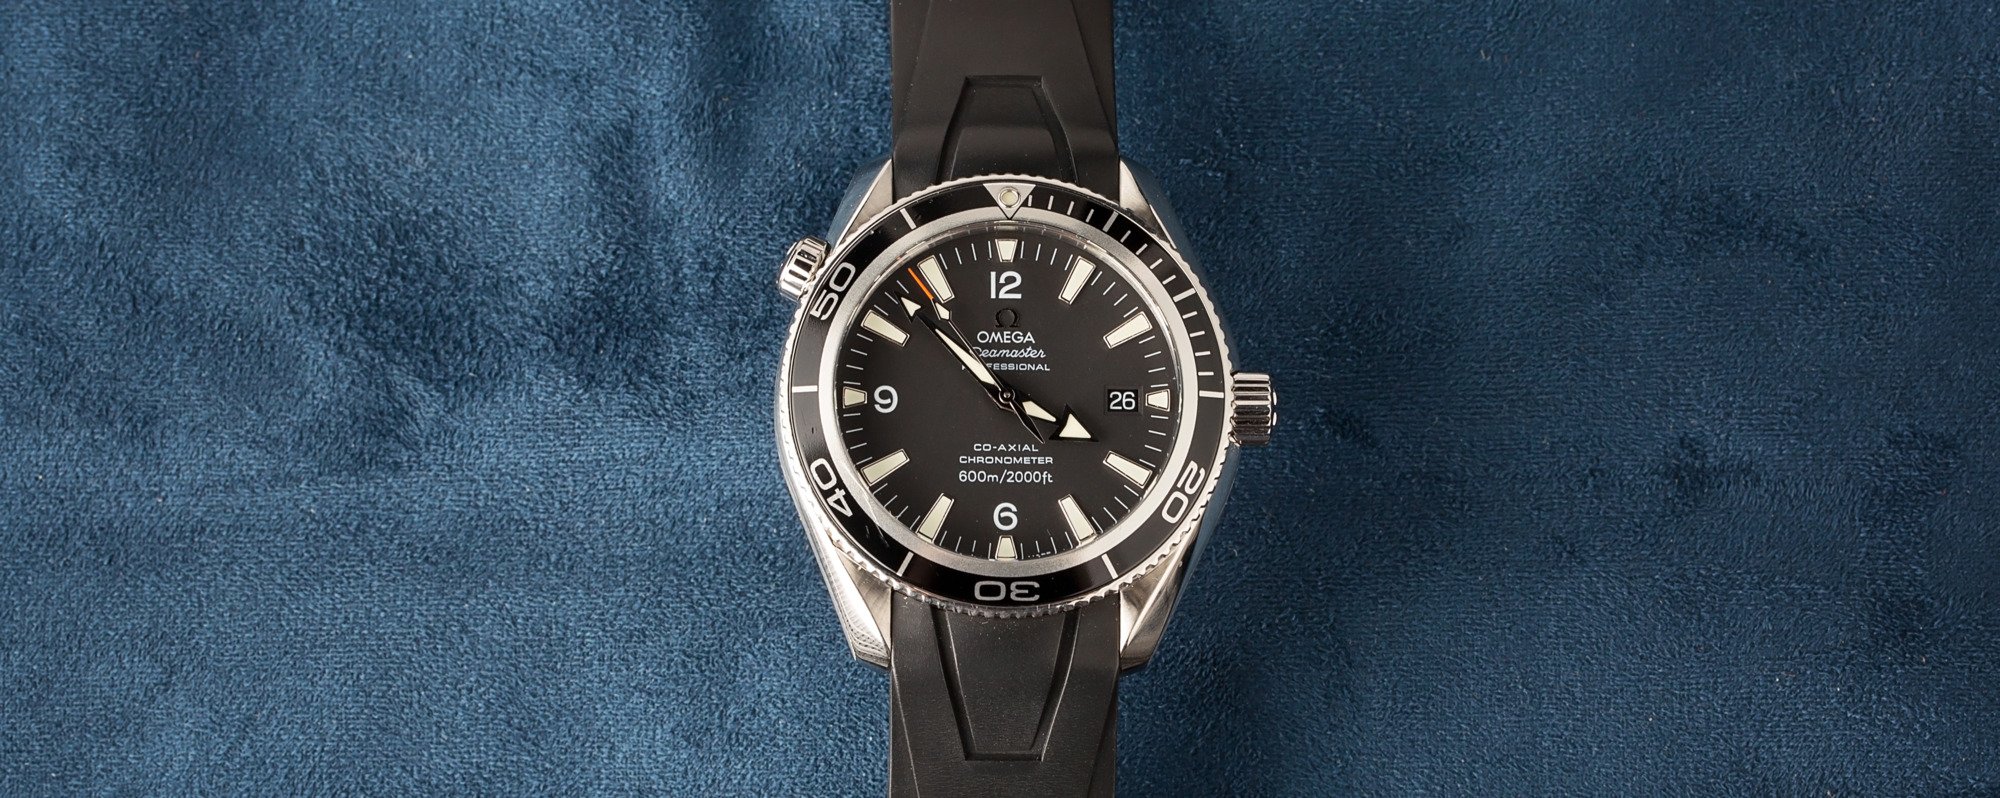 The Casino Diver | Monterey Watch Co.